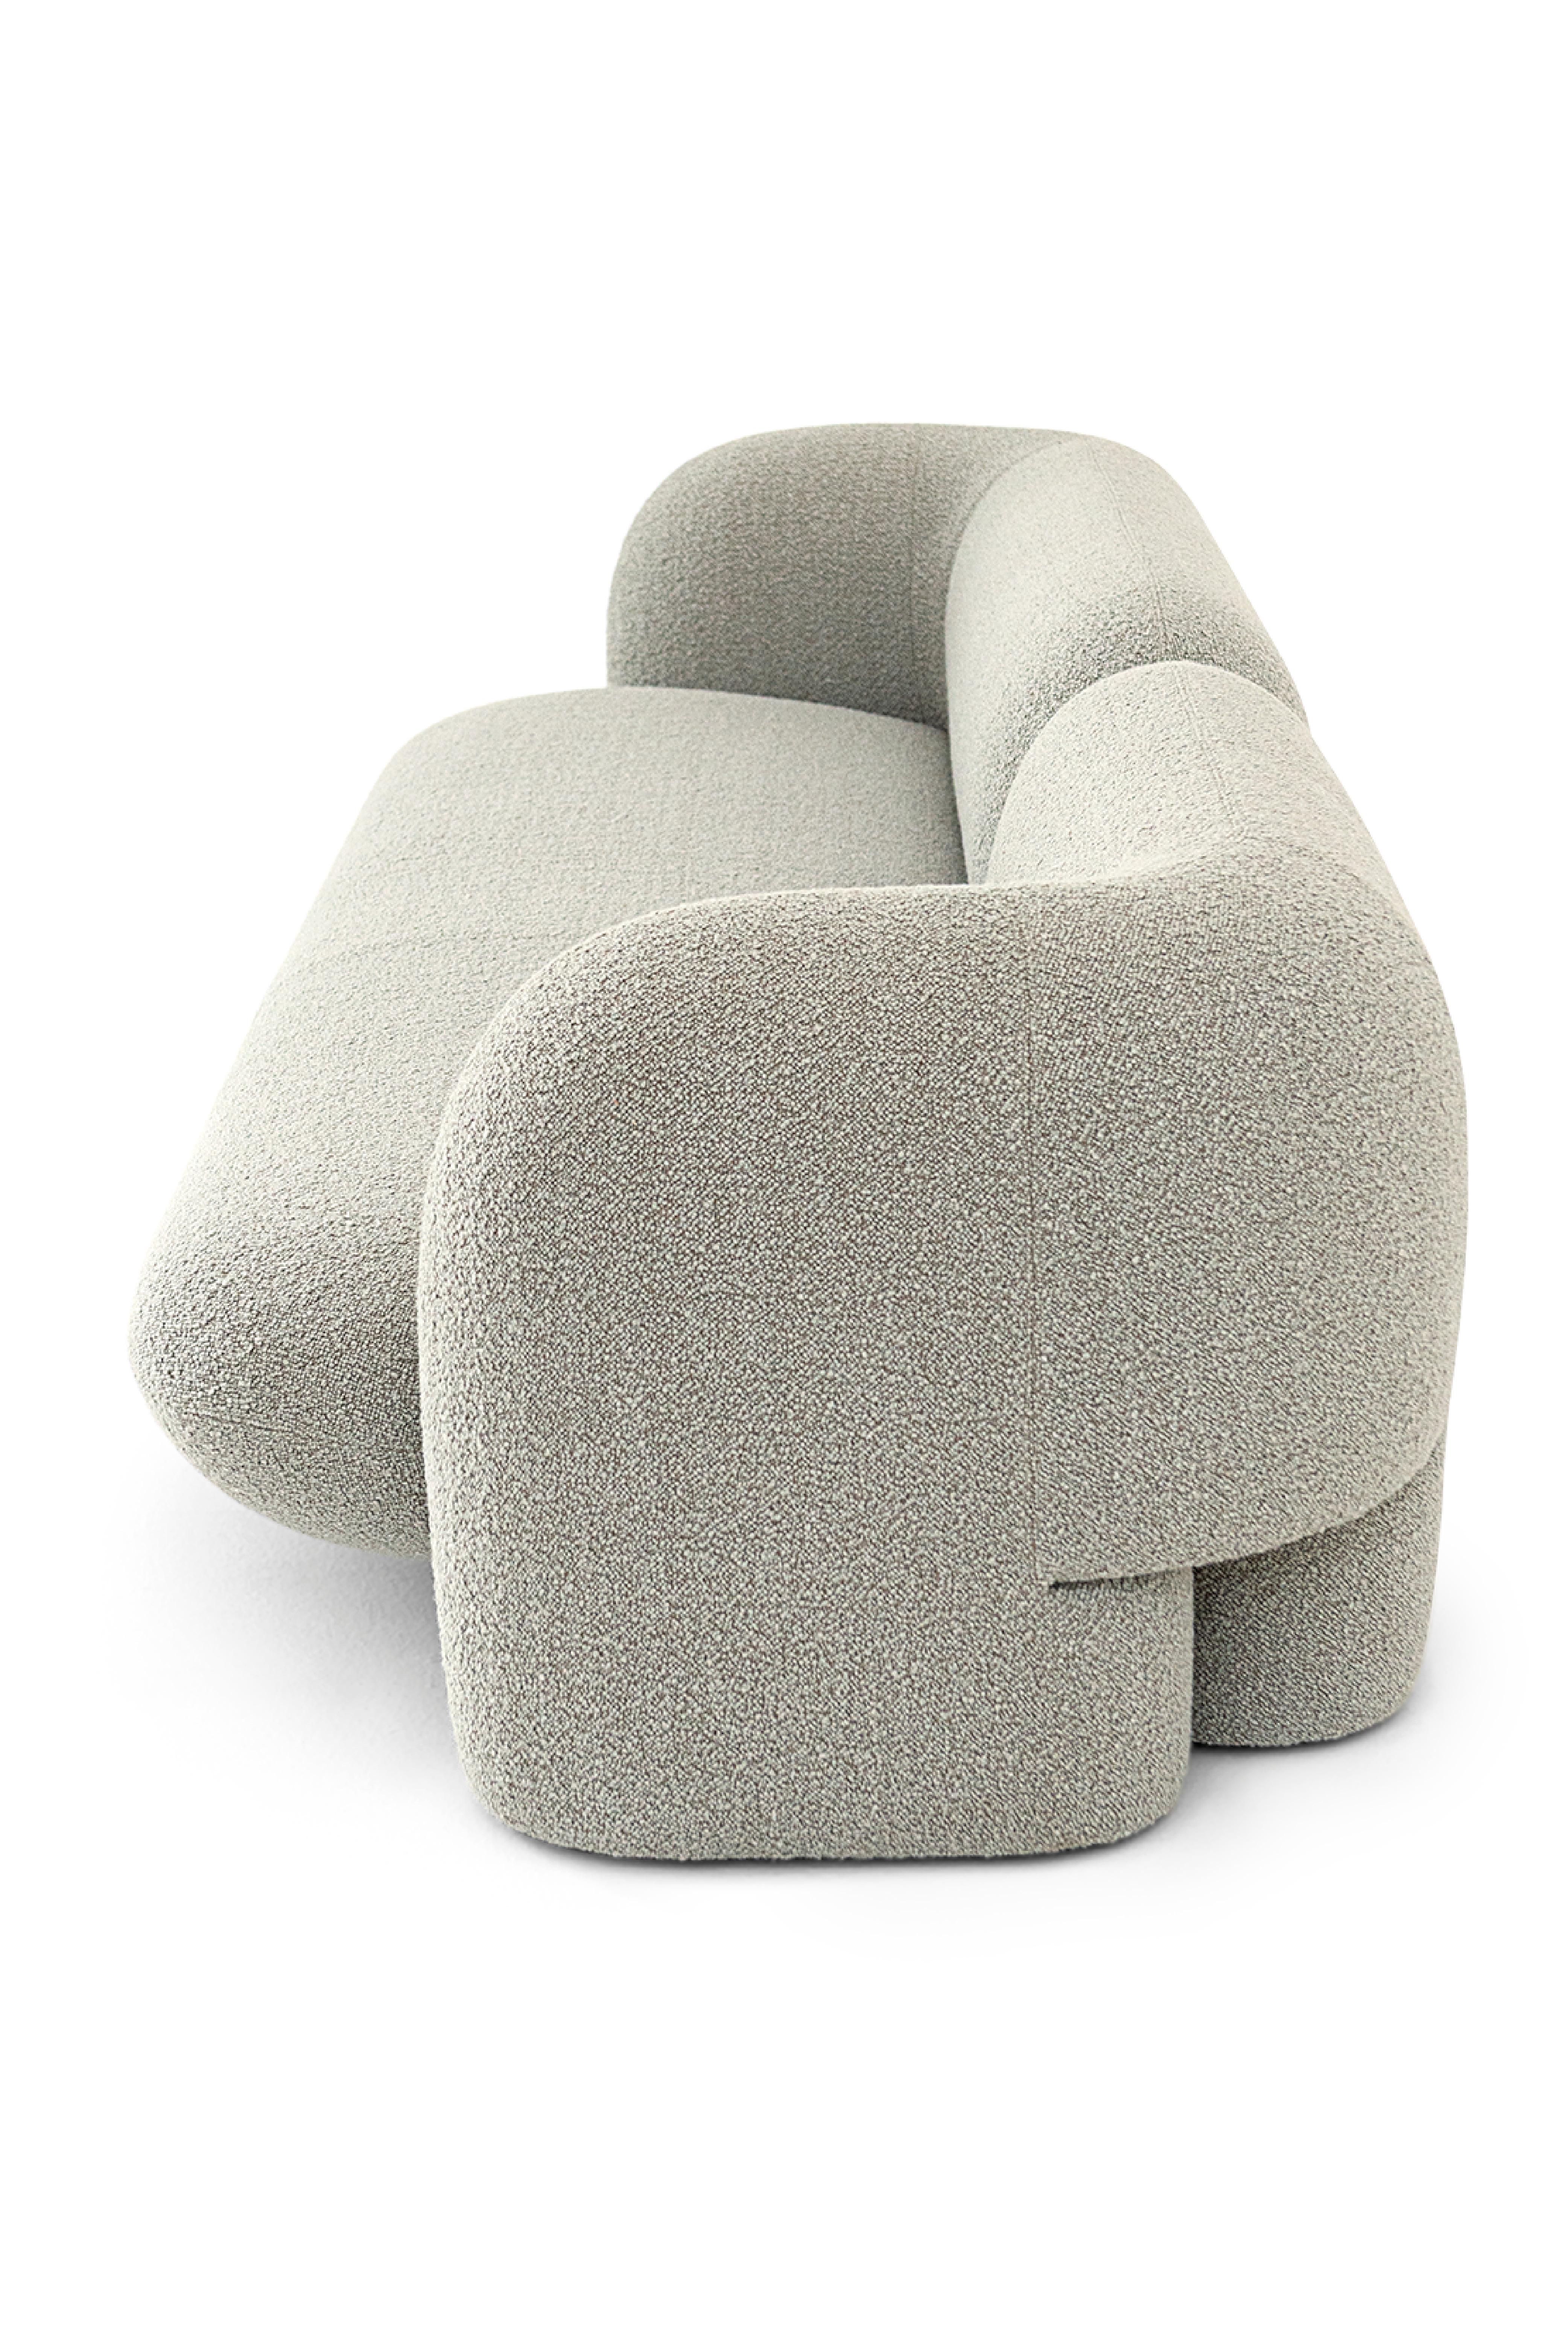 Modern Contemporary Three-Seater Sofa by Hessentia Upholstered in Grey Bouclé Fabric For Sale